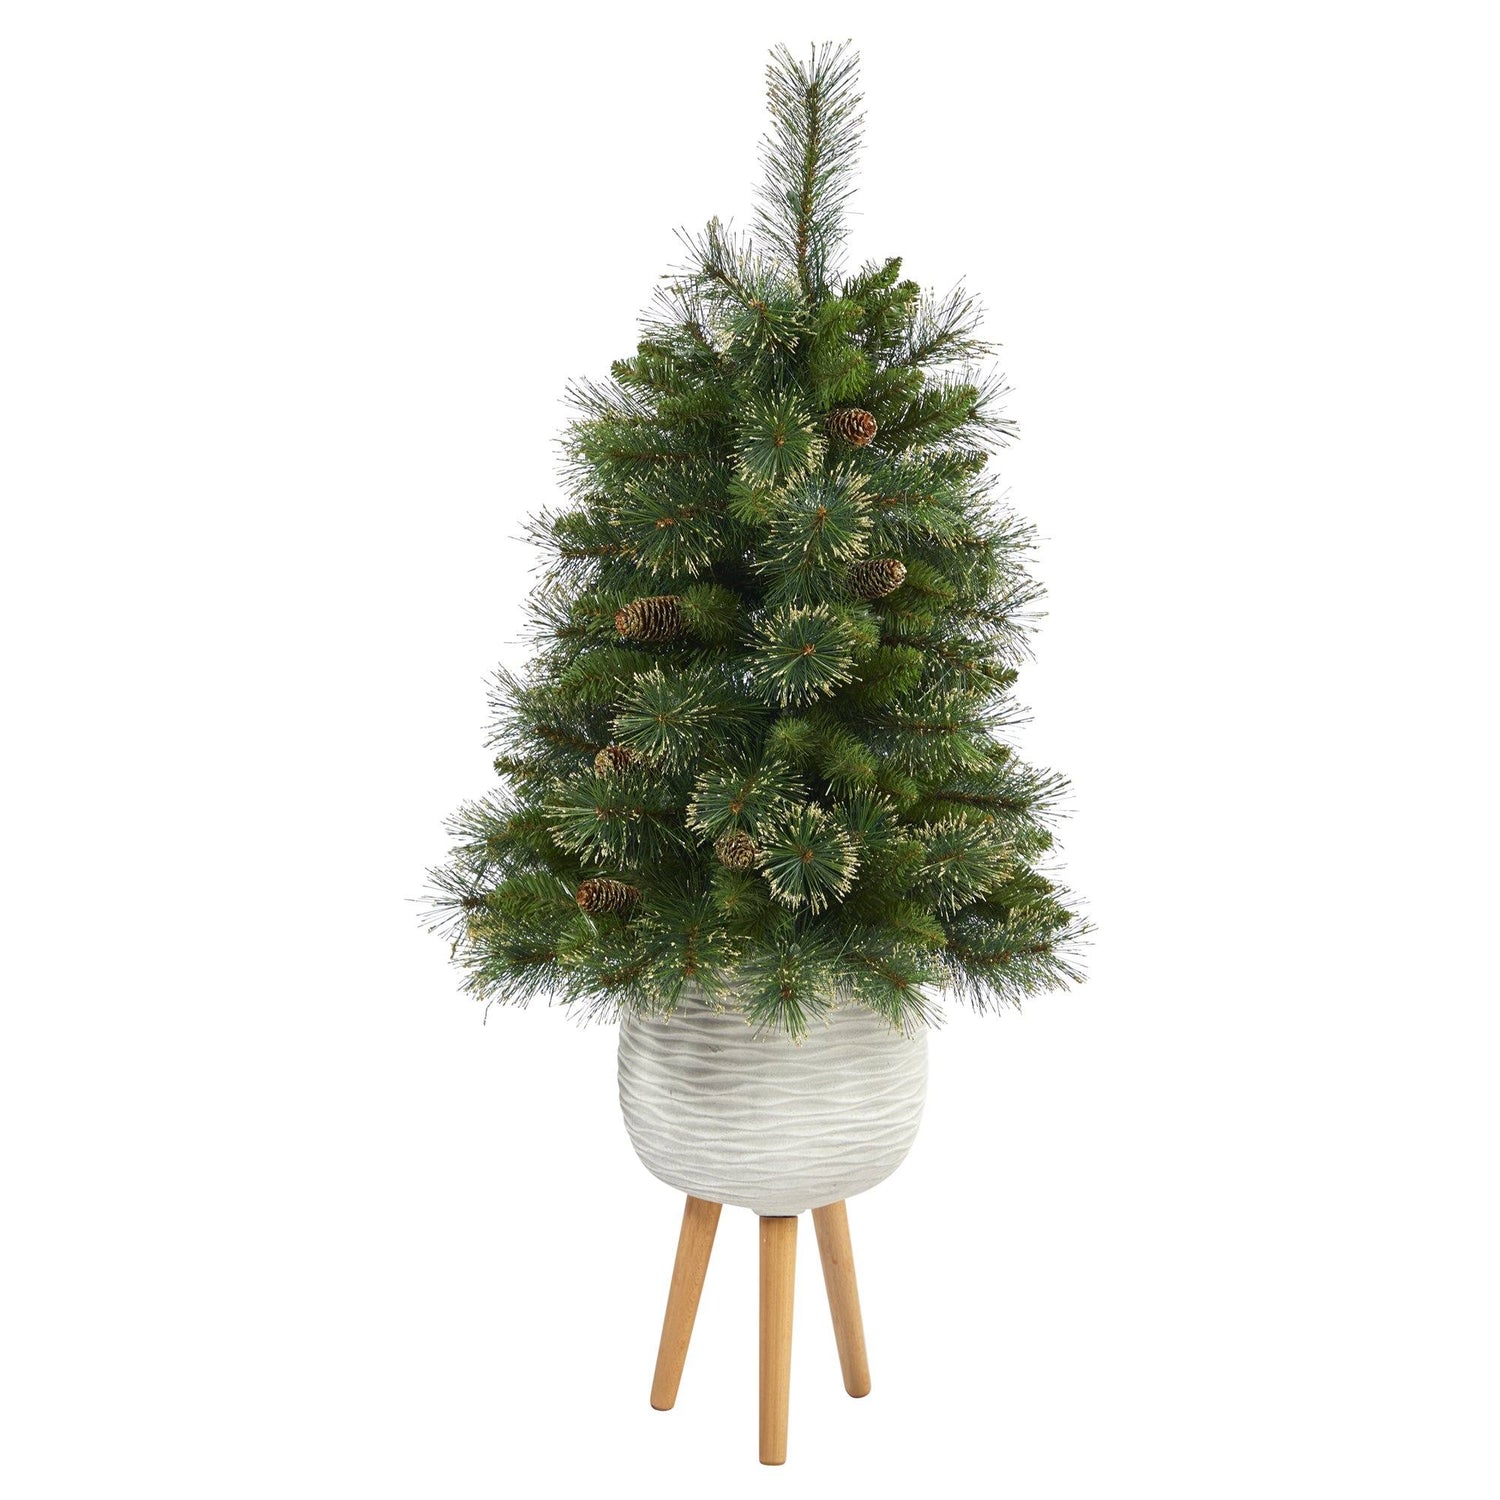 4’ Golden Tip Washington Pine Artificial Christmas Tree with 50 Clear Lights, Pine Cones and 148 Bendable Branches in White Planter with Stand